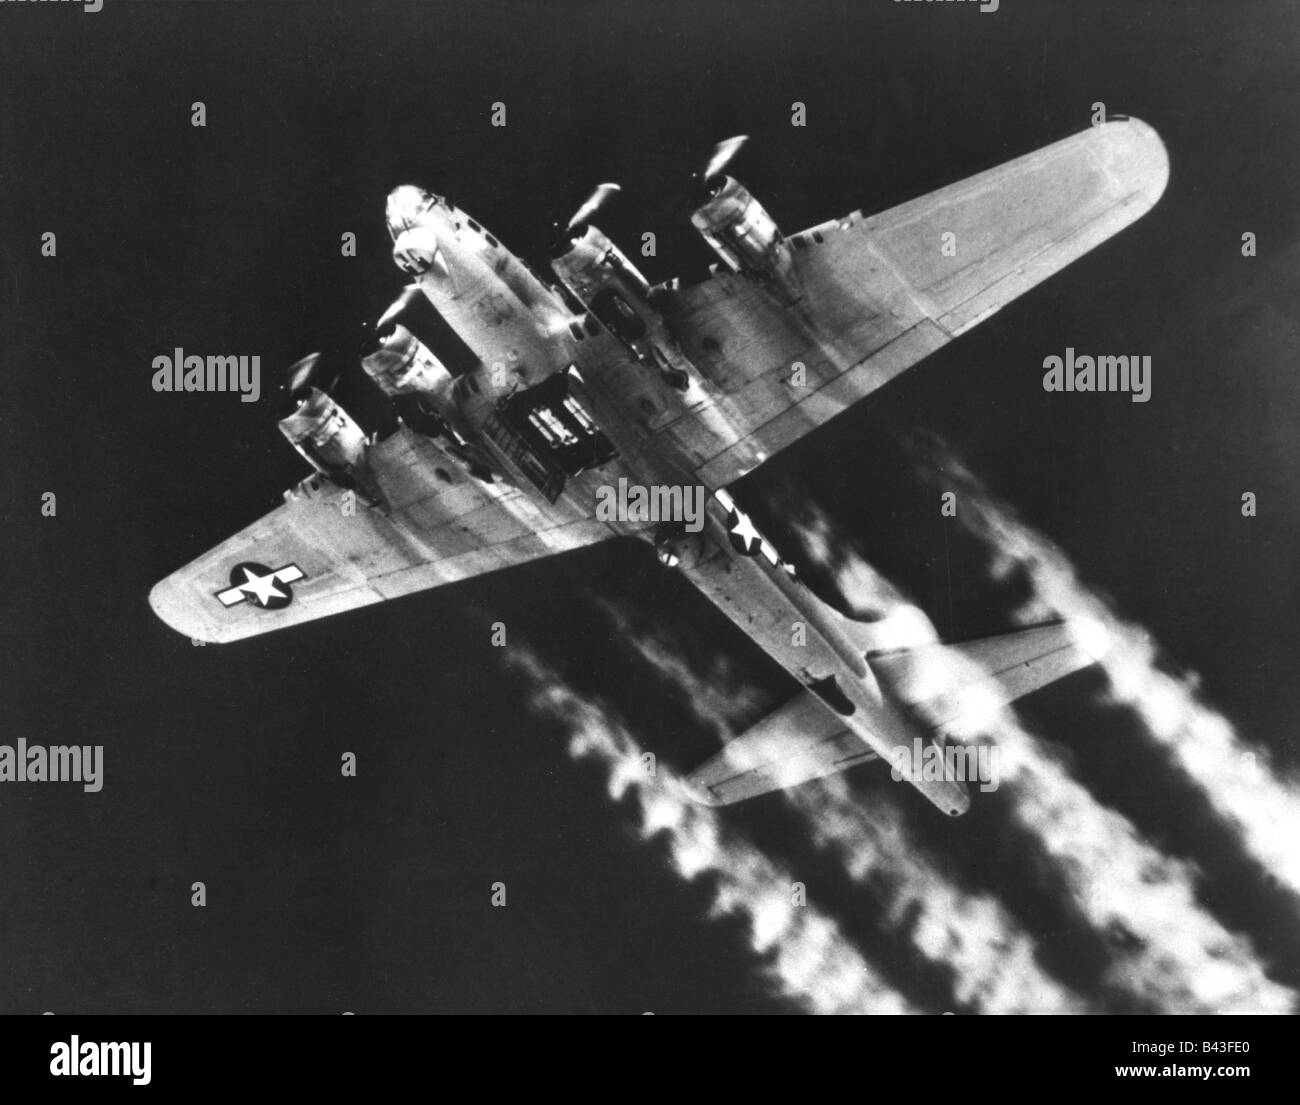 events, Second World War / WWII, aerial warfare, aircraft, US bomber Boeing B-17 G 'Flying Fortress' in the air, open bomb bay, circa 1943 / 1944, Stock Photo